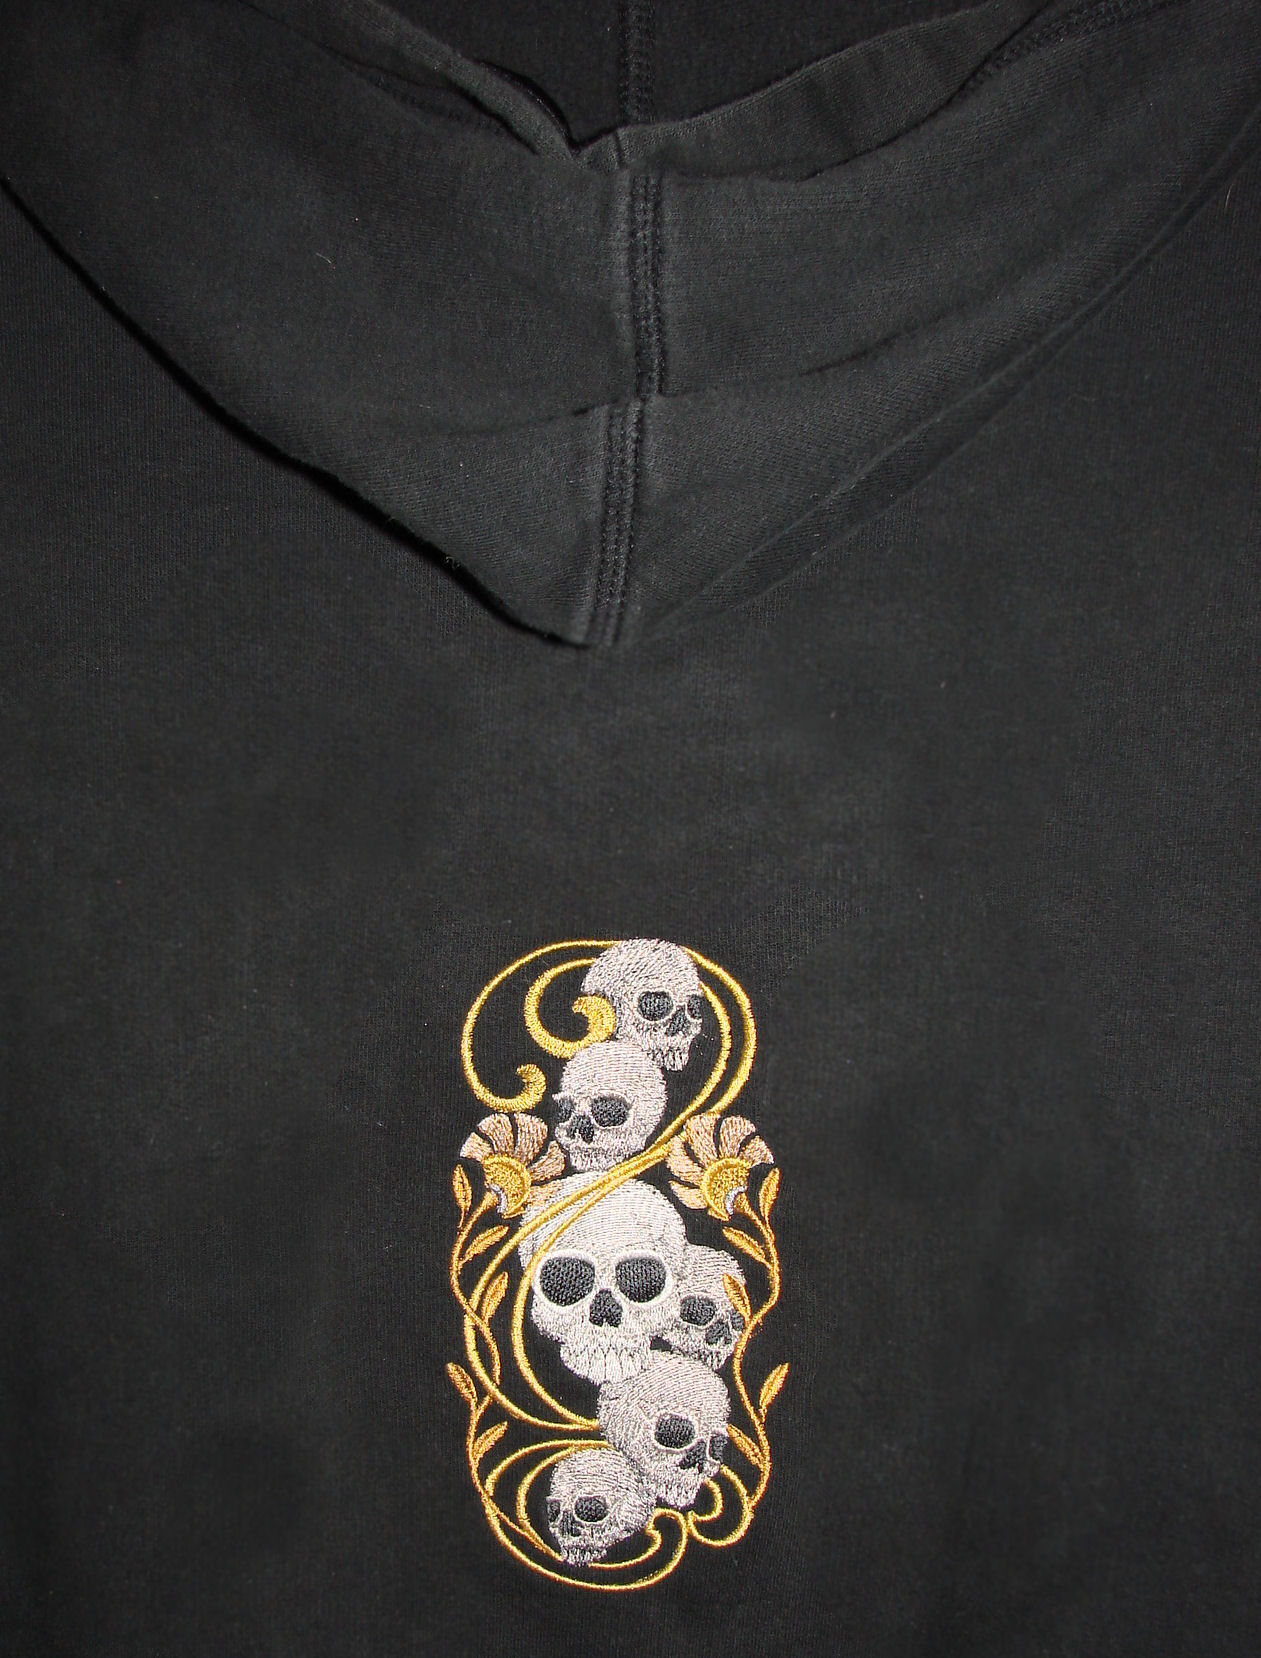 a black hooded sweatshirt with a skull and crossbone design